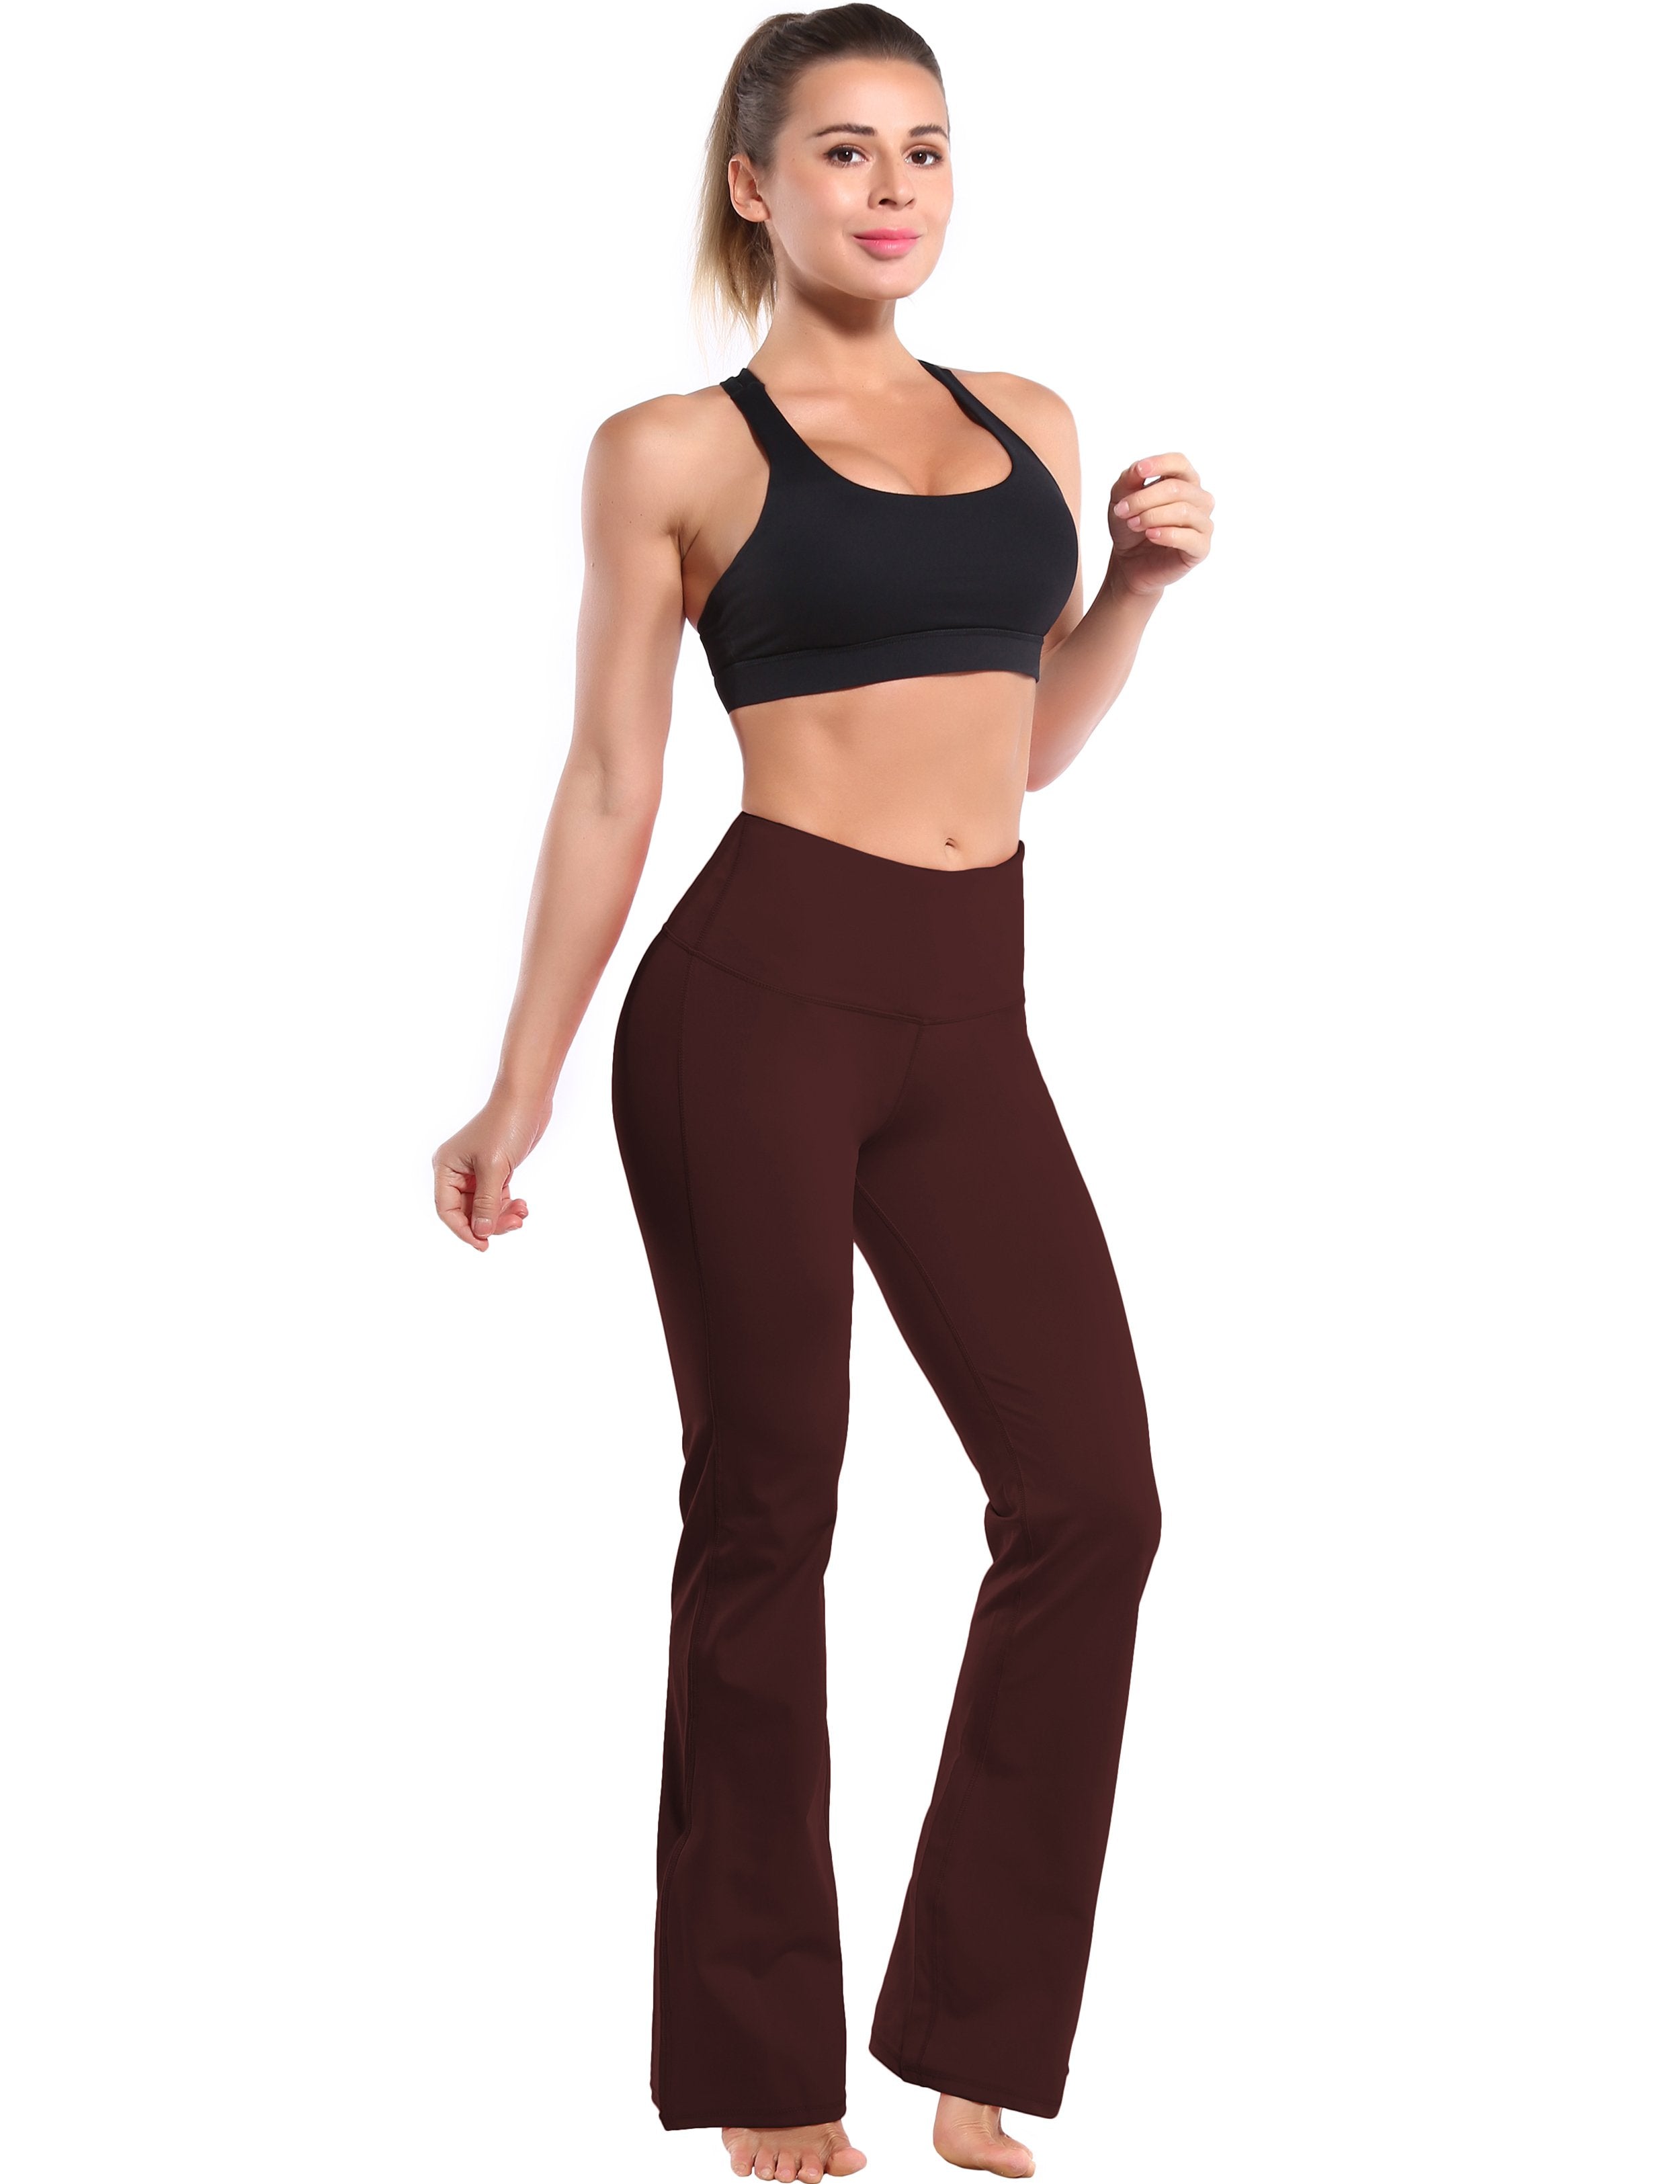 High Waist Bootcut Leggings Mahoganymaroon 75%Nylon/25%Spandex Fabric doesn't attract lint easily 4-way stretch No see-through Moisture-wicking Tummy control Inner pocket Five lengths